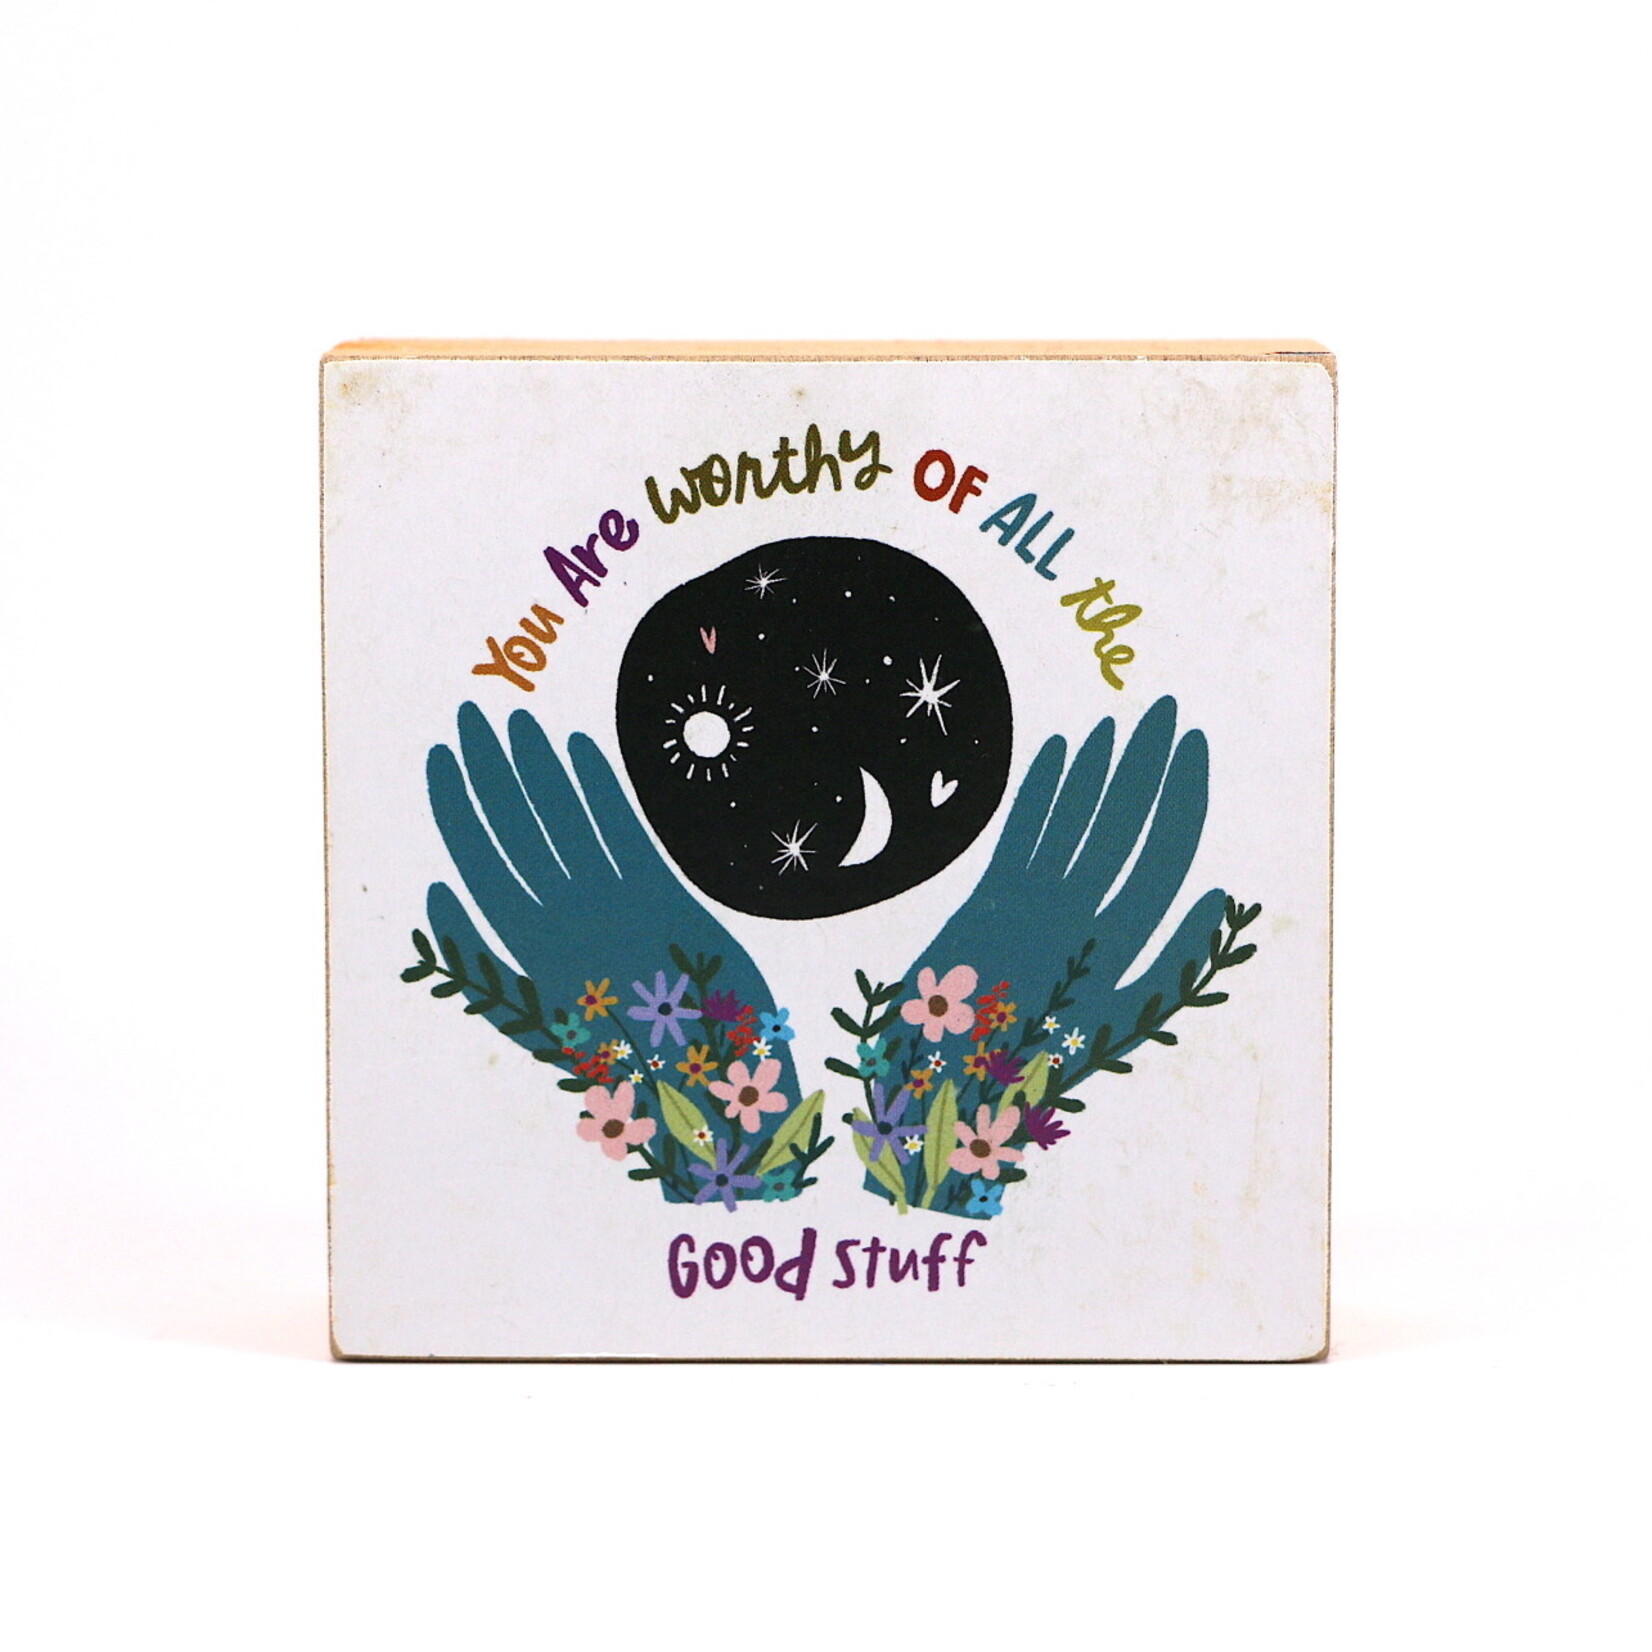 PRIMITIVES BY KATHY You Are Worthy of All the Good Stuff Wooden Box Sign